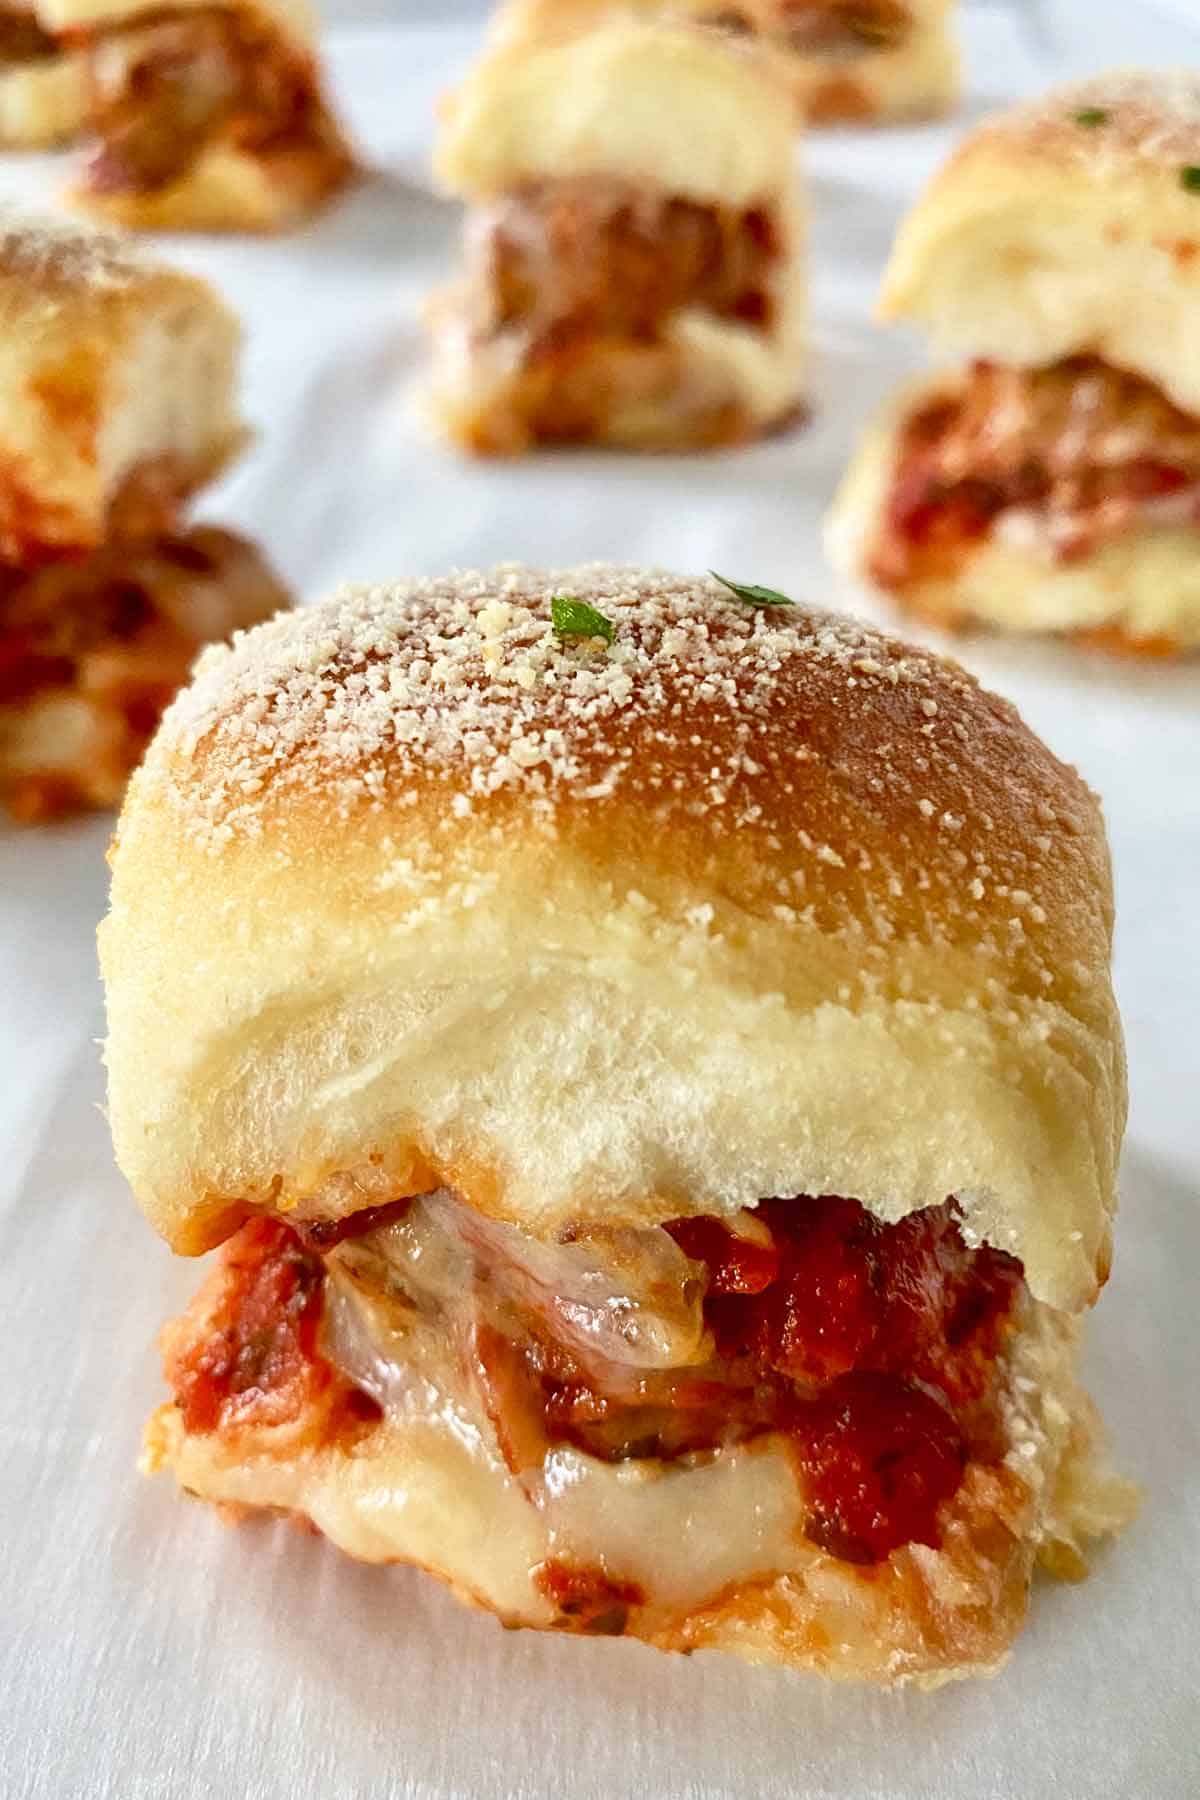 A meatball slider up close, with five more in the background.